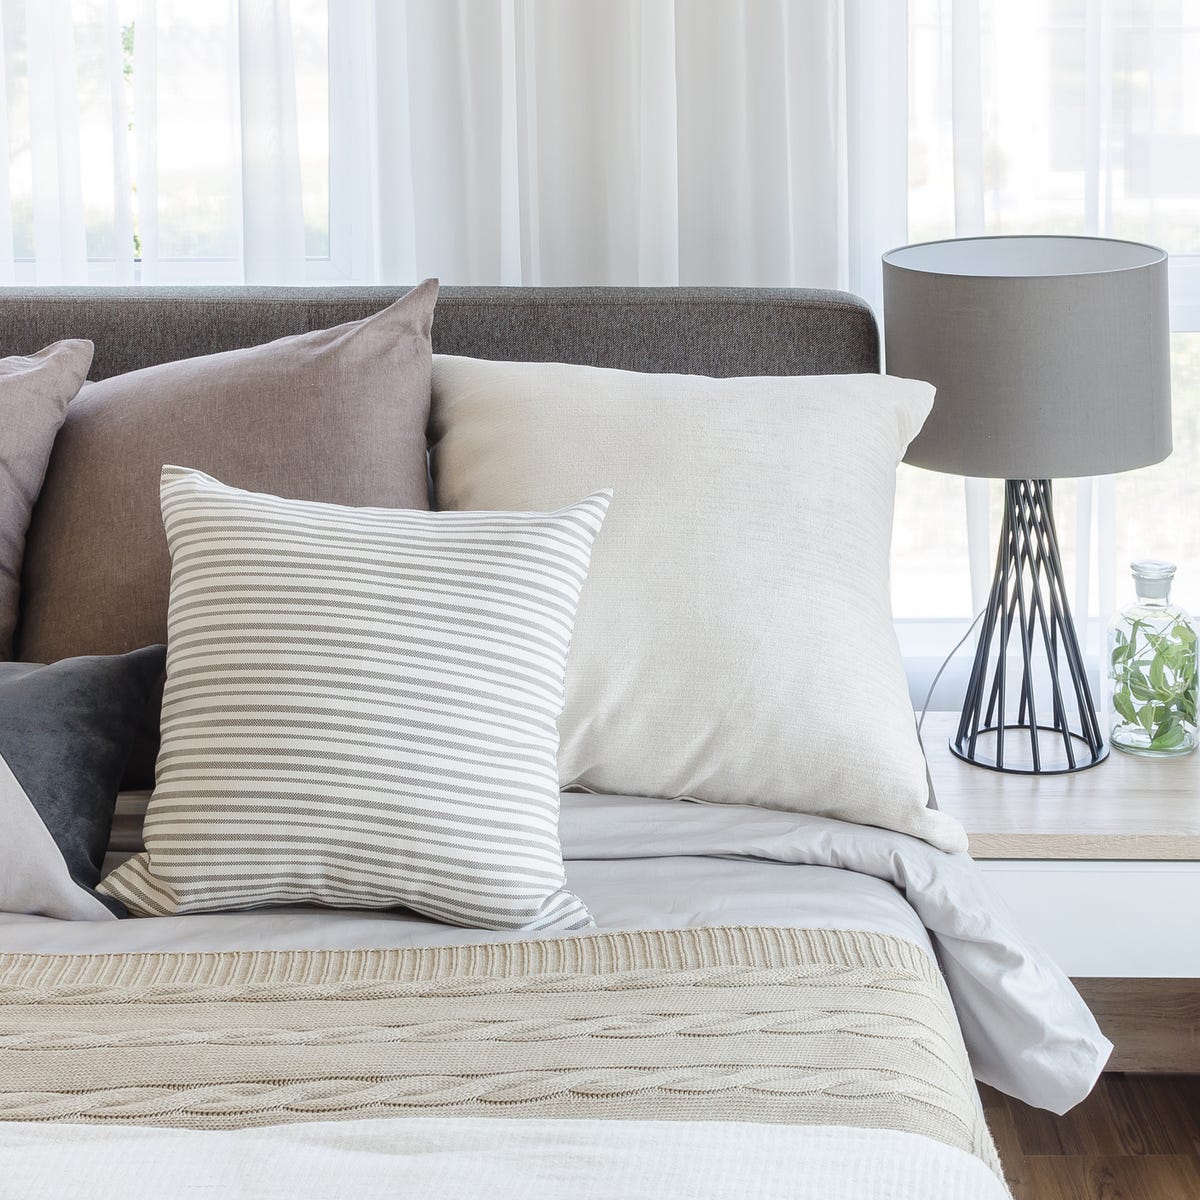 How To Layer Your Bed: Our Best Bedscaping Tips - Grandin Road Blog